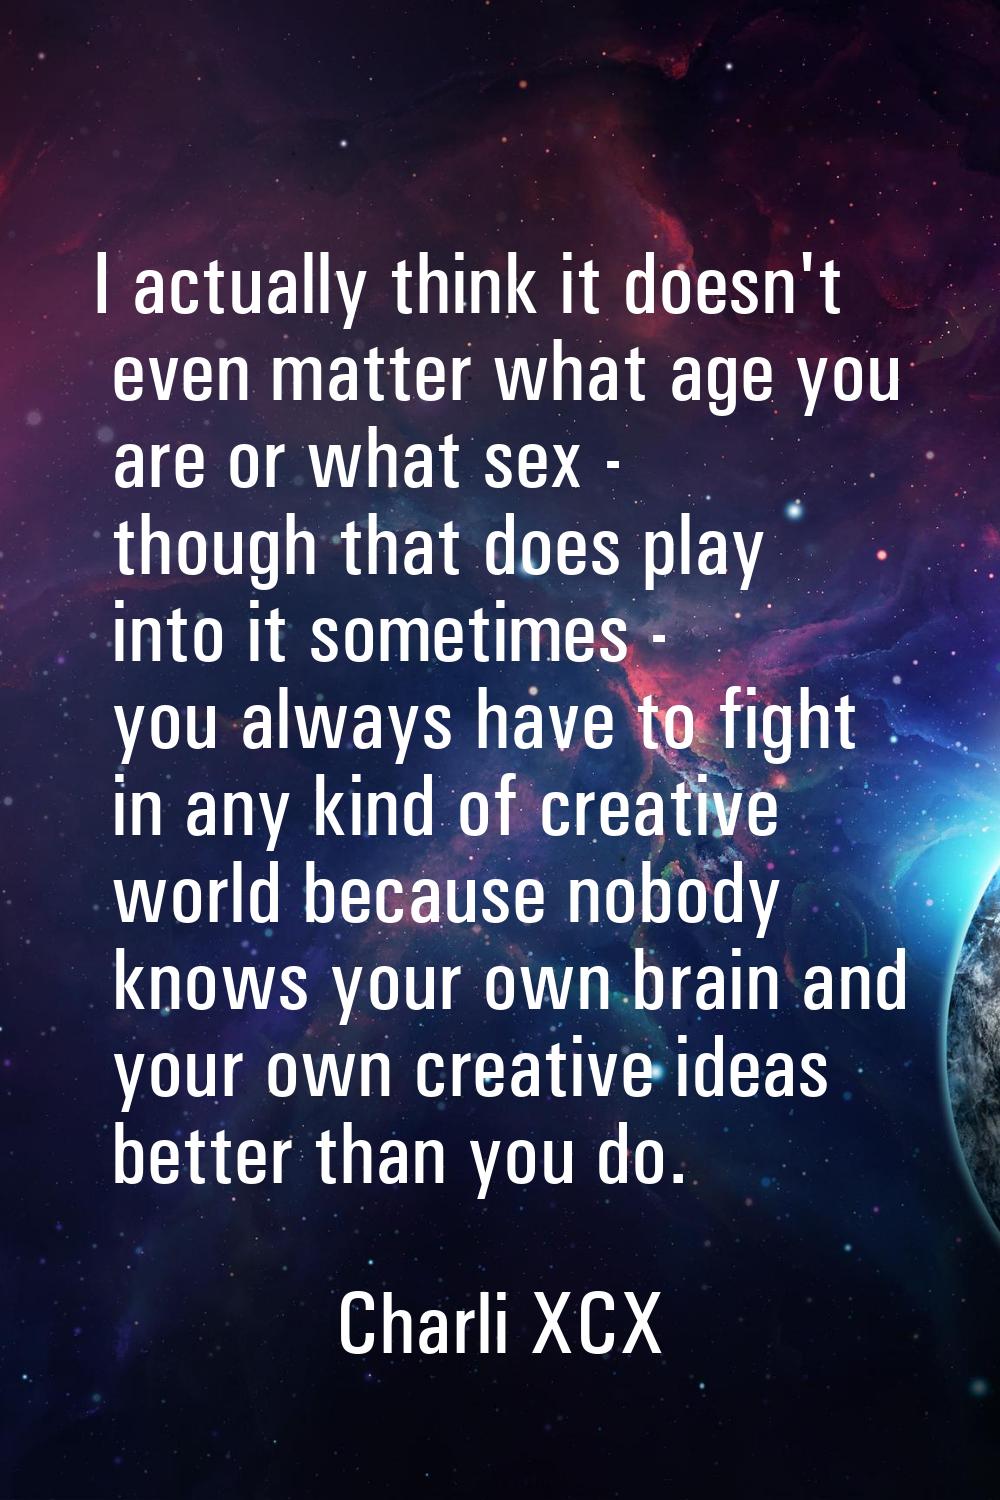 I actually think it doesn't even matter what age you are or what sex - though that does play into i